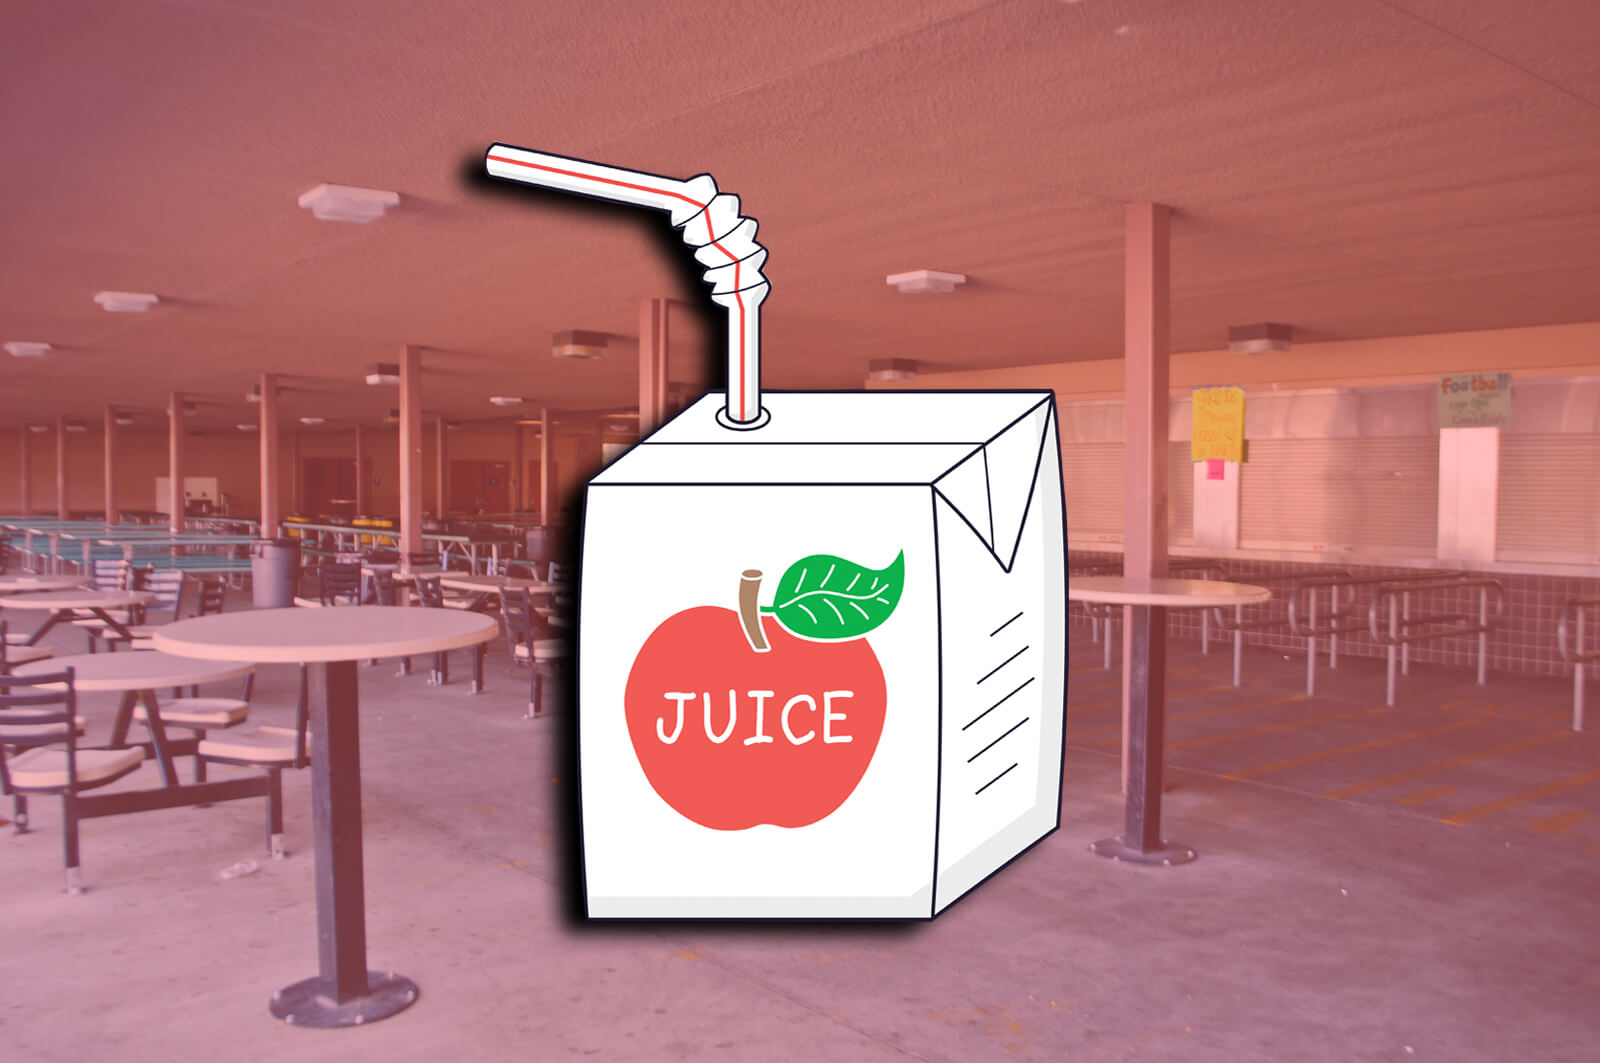 An illustrated apple juice box on top of an image of an outdoor school cafeteria. November 2020